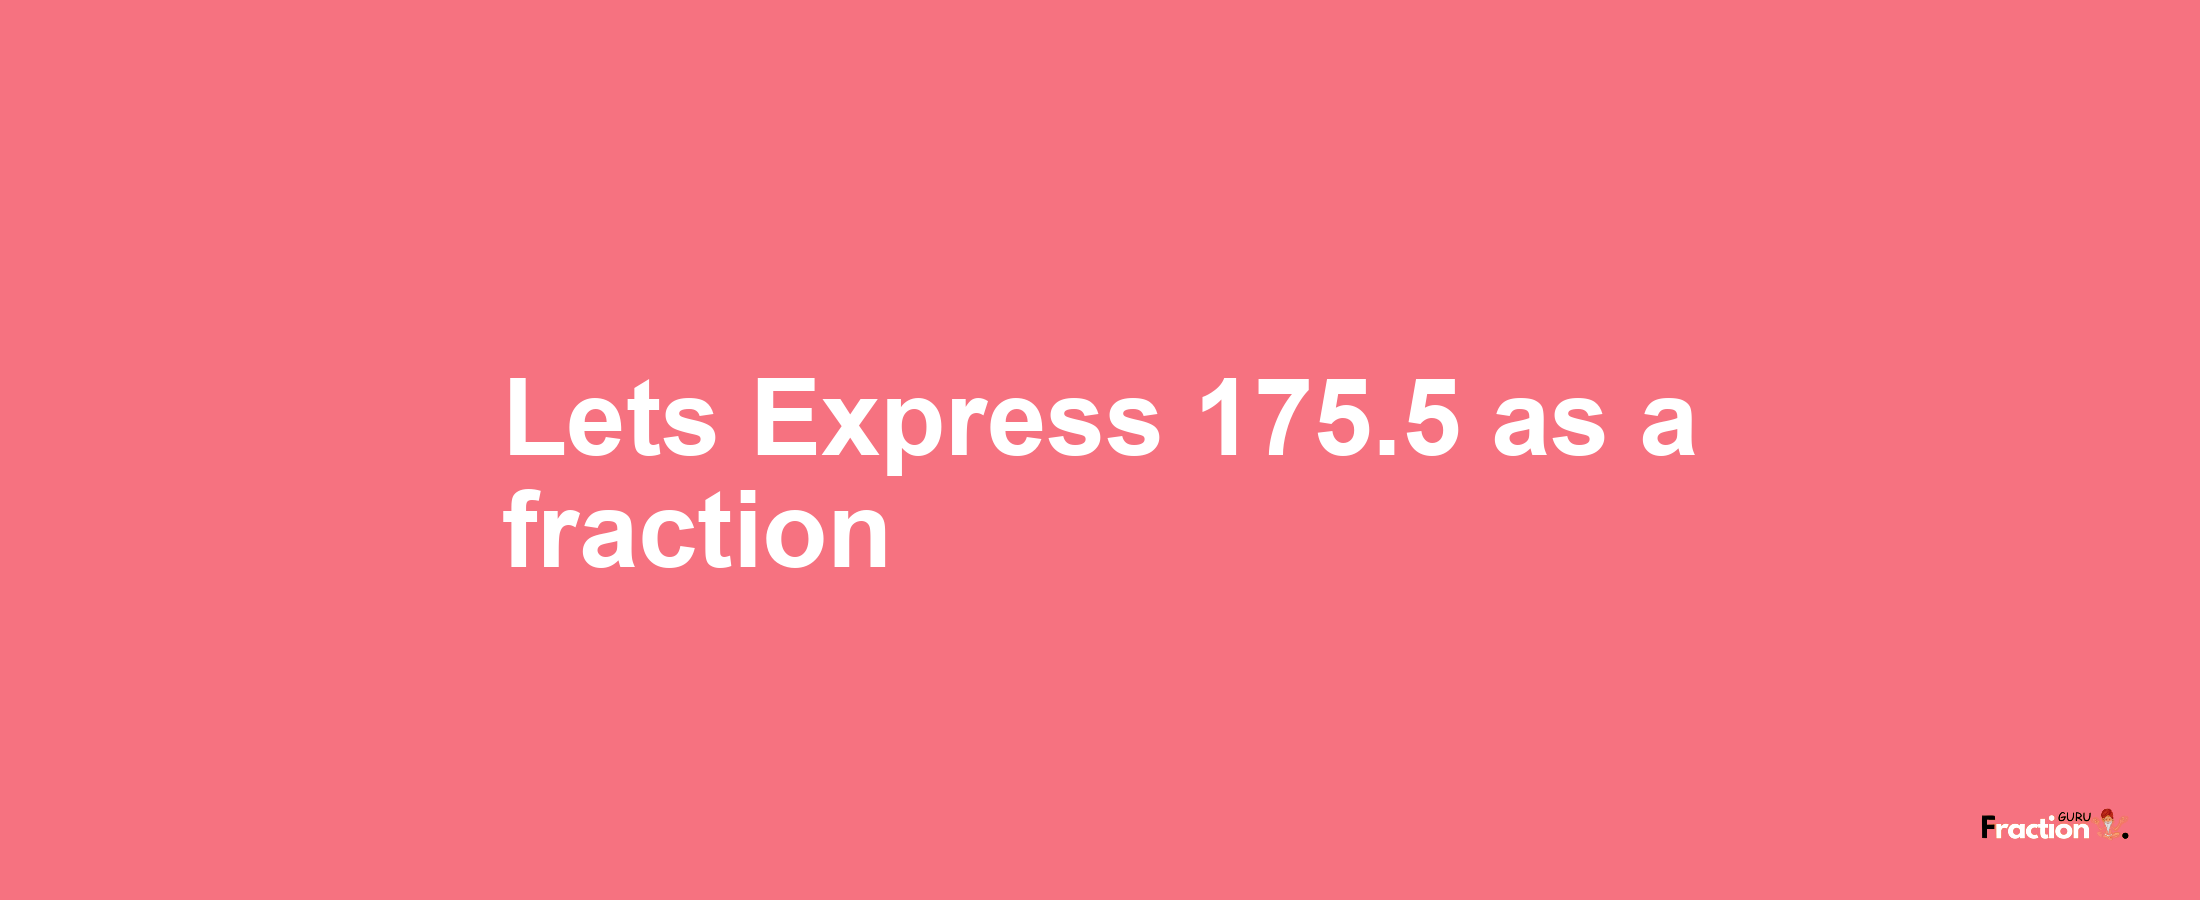 Lets Express 175.5 as afraction